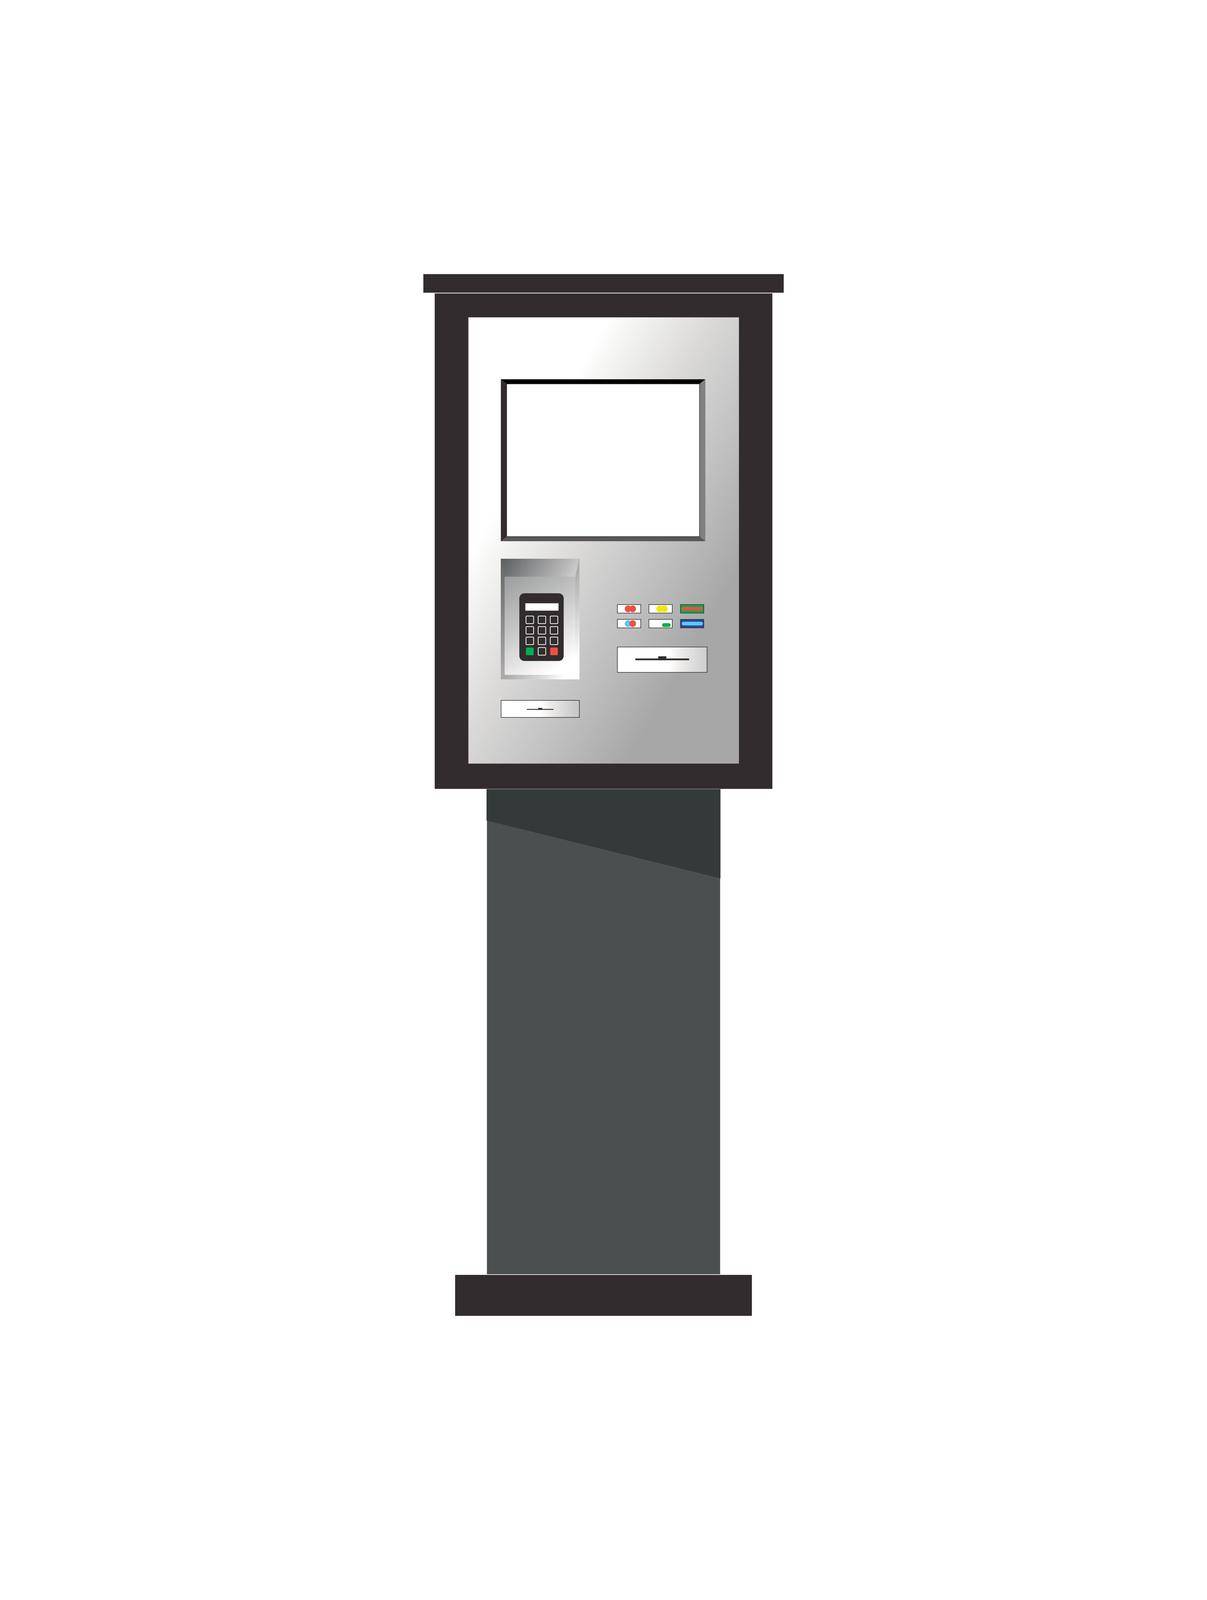 Self-service kiosk. Self-pay terminal for retail chains, parking lots, rentals. by AliaksaB